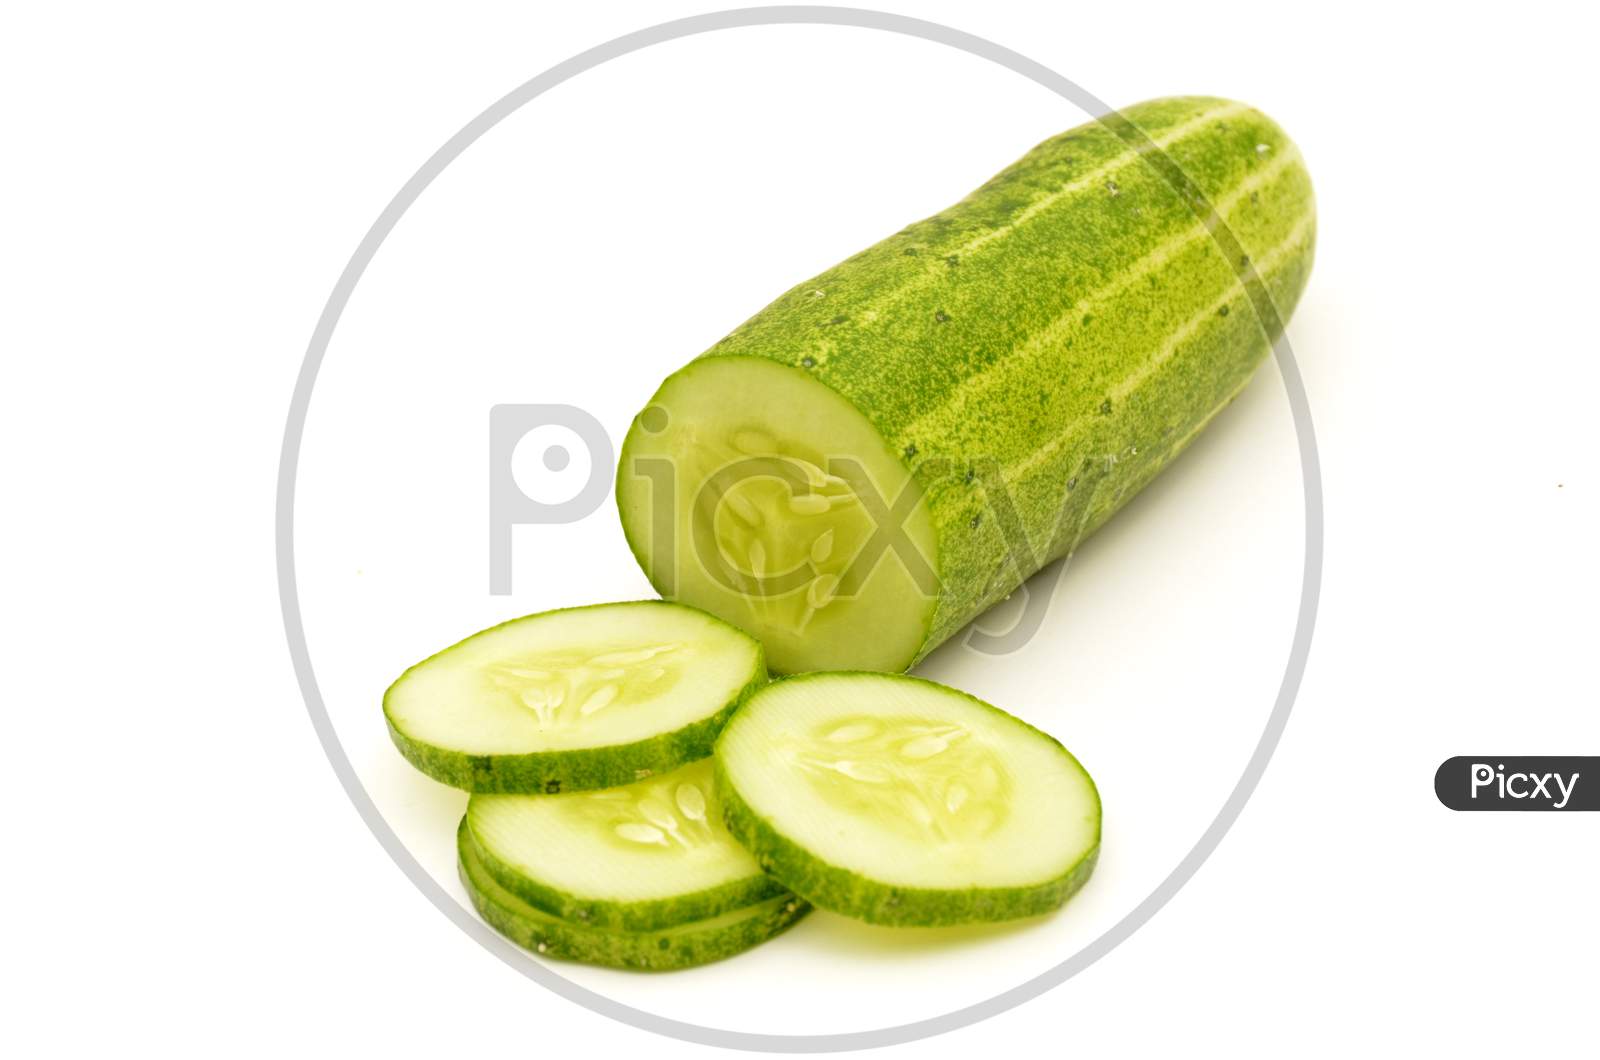 ripe cucumber with slice isolated on white background